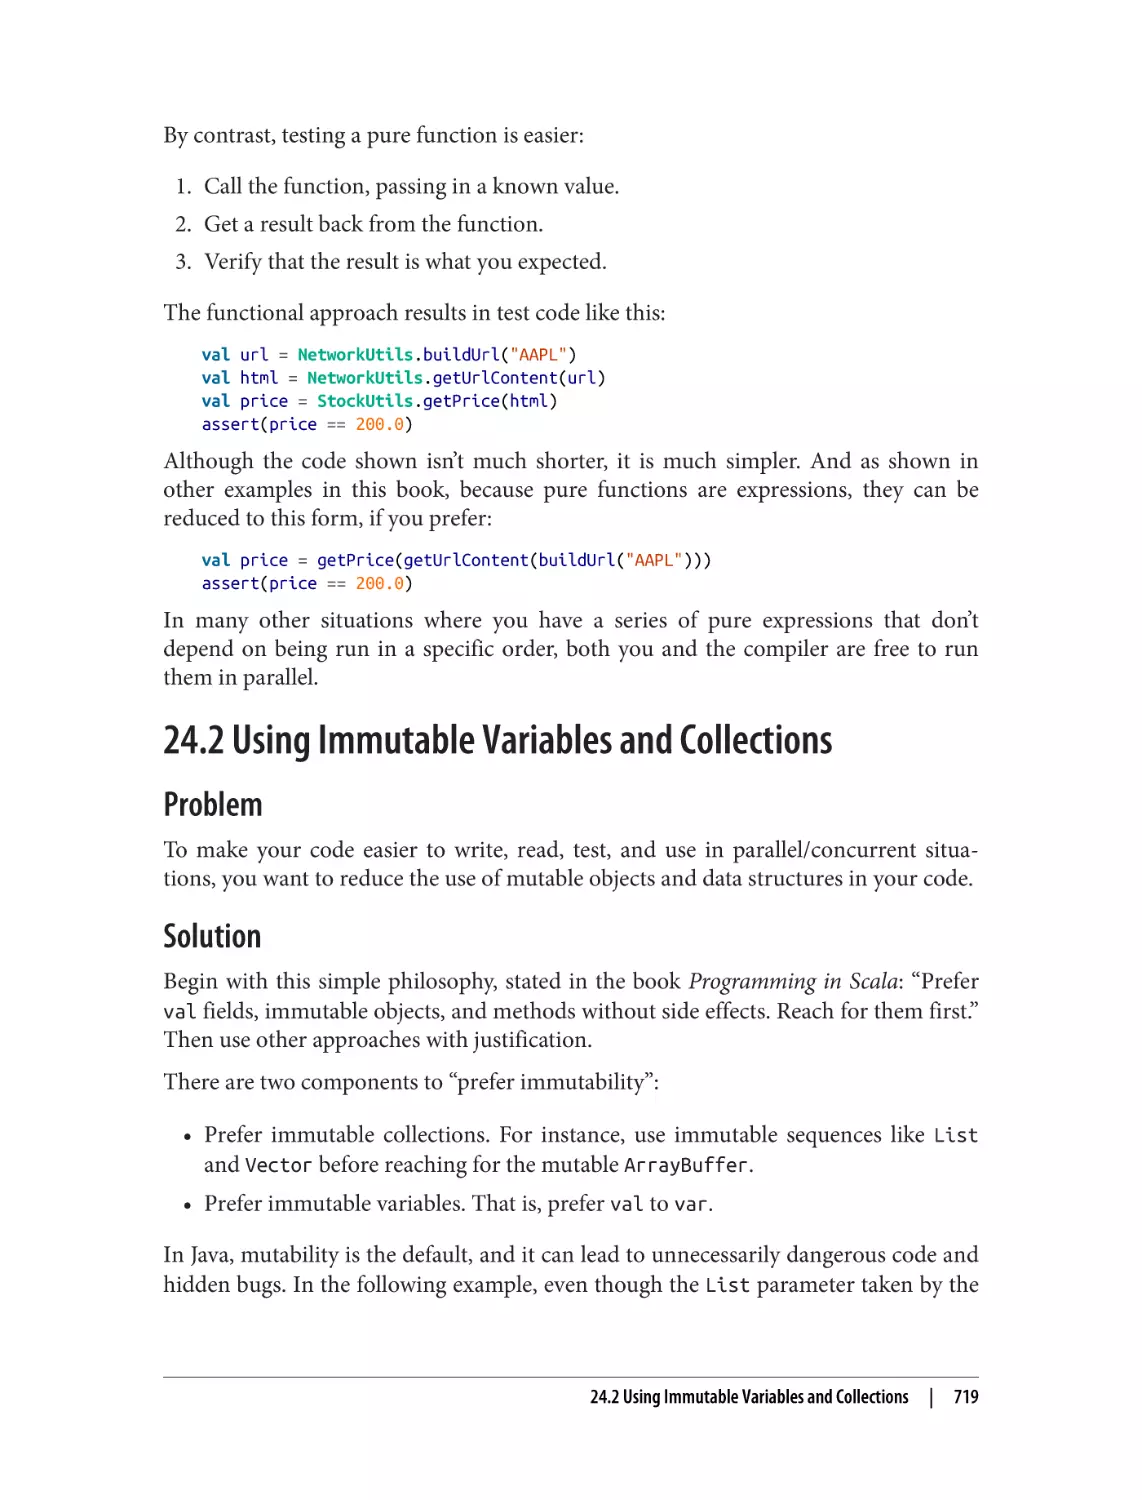 24.2 Using Immutable Variables and Collections
Problem
Solution